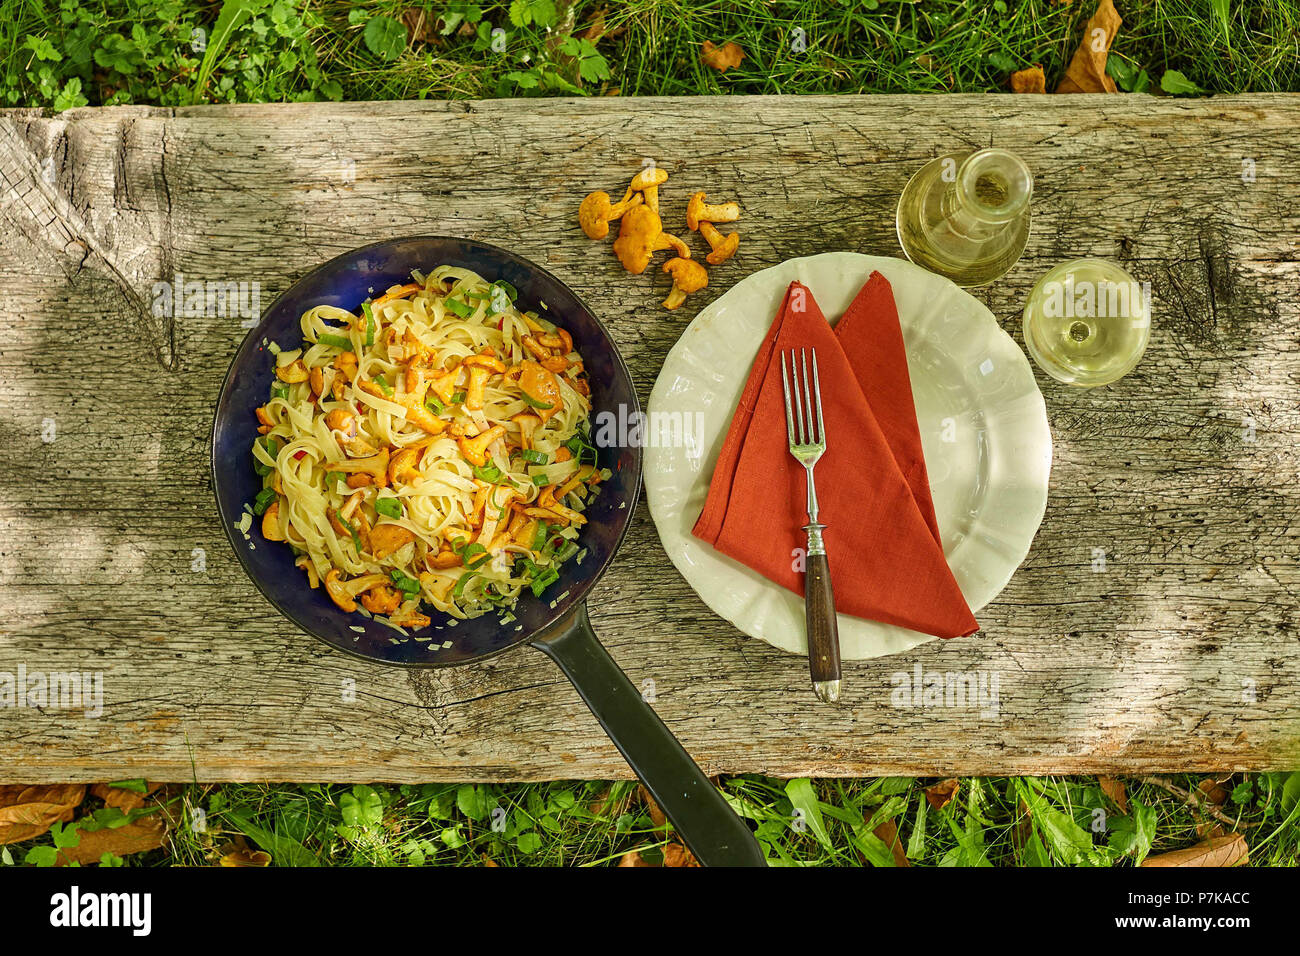 Pan with tagliatelle and chanterelles with place setting and wine on old wooden board Stock Photo